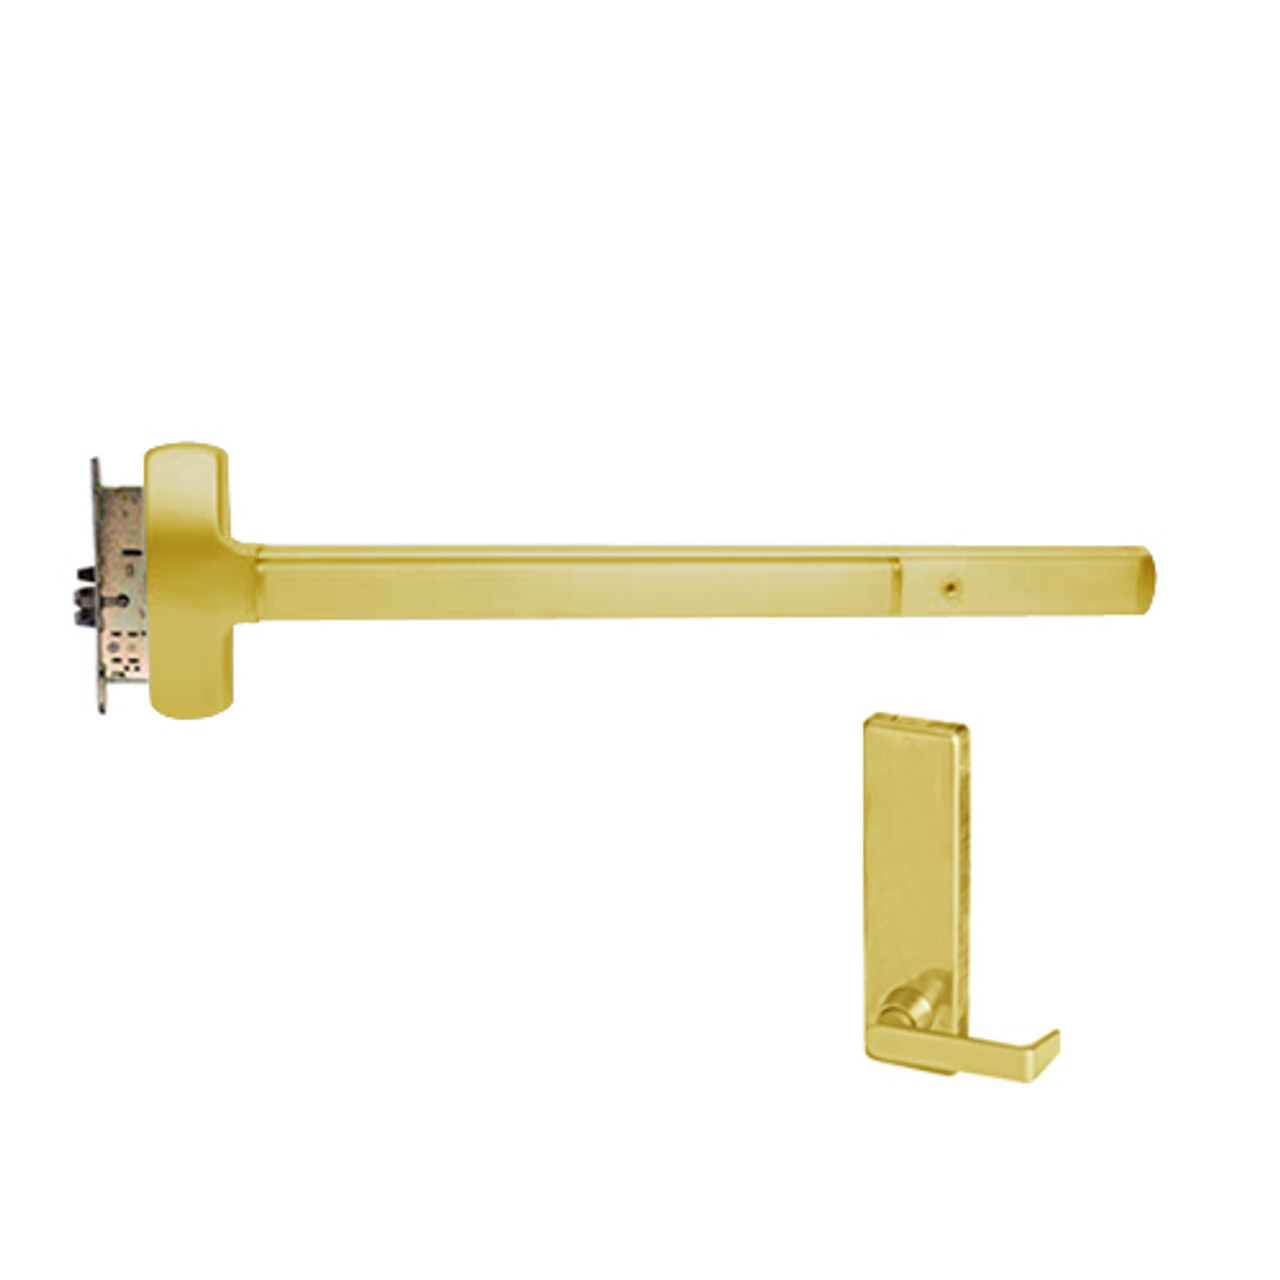 25-M-L-BE-DANE-US4-3-LHR Falcon Exit Device in Satin Brass